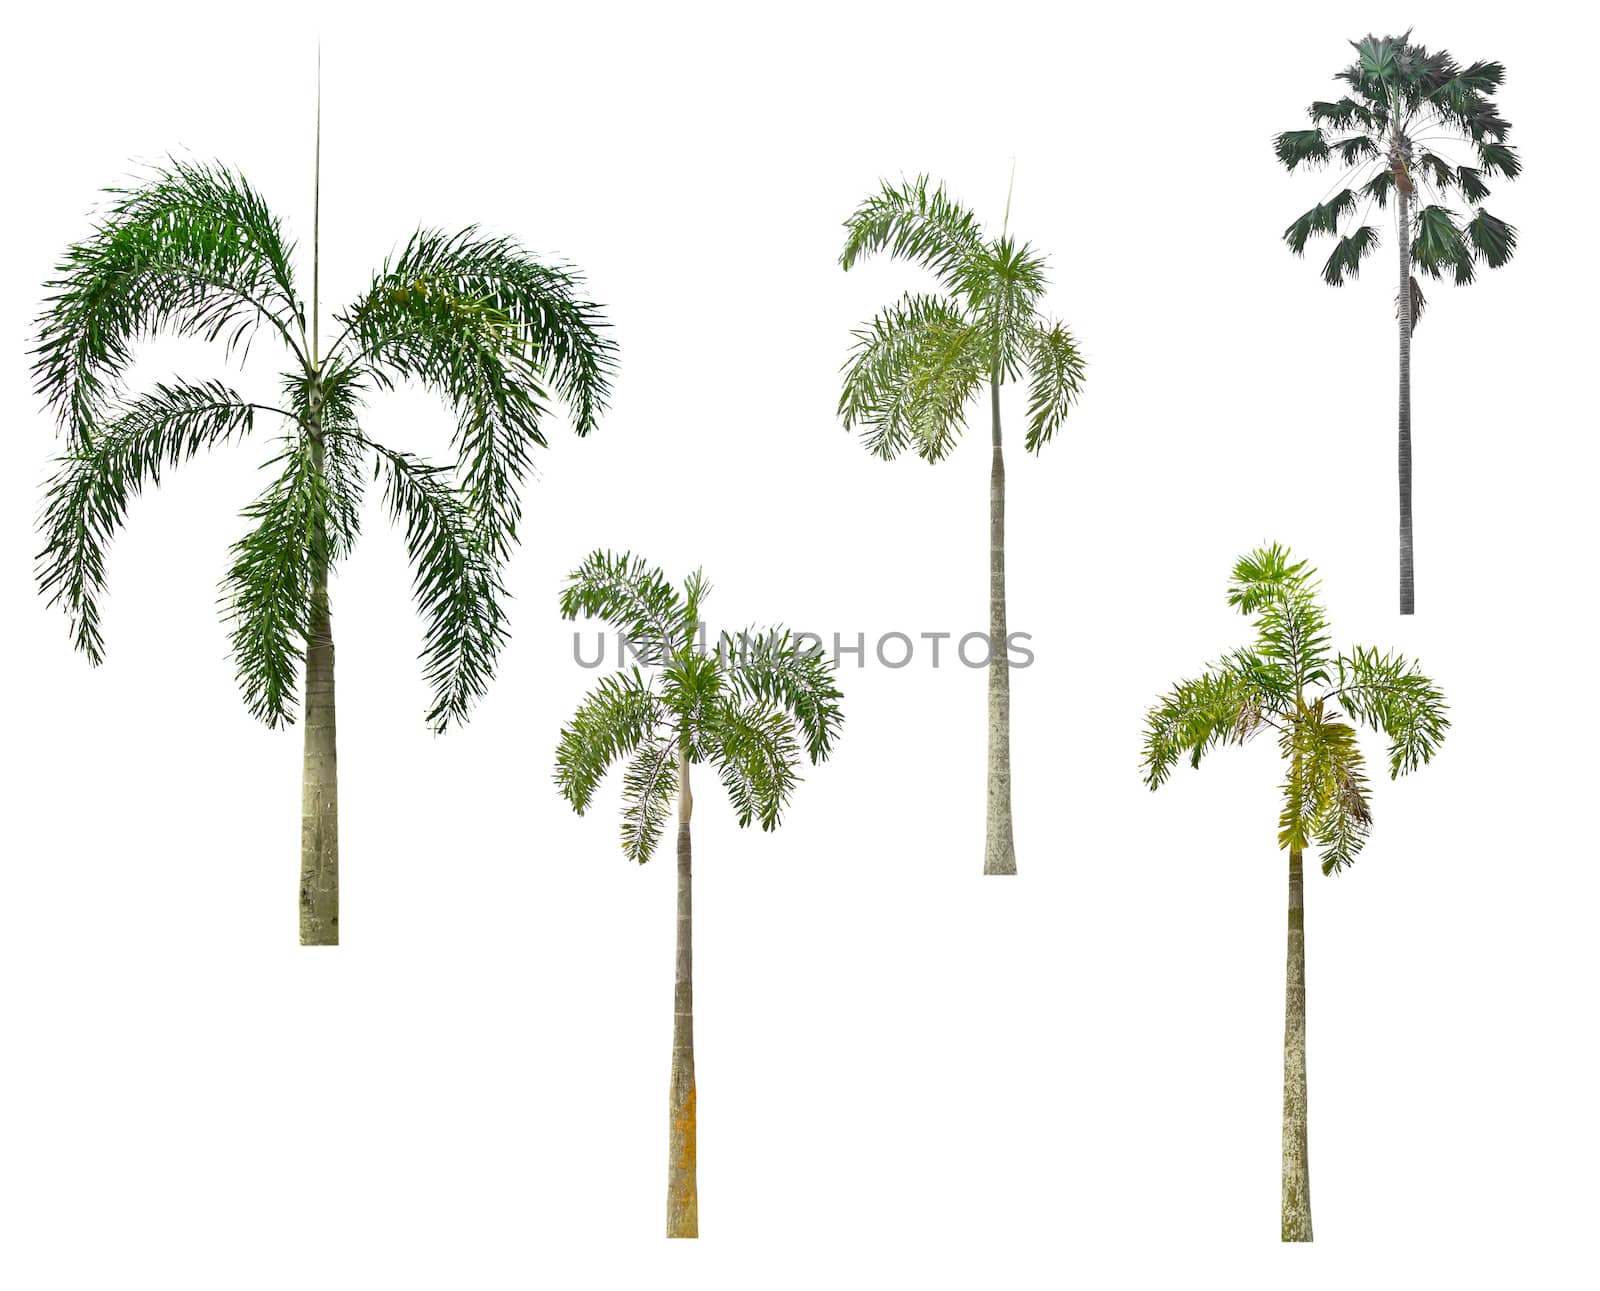 Palm tree on a white background by Thanamat